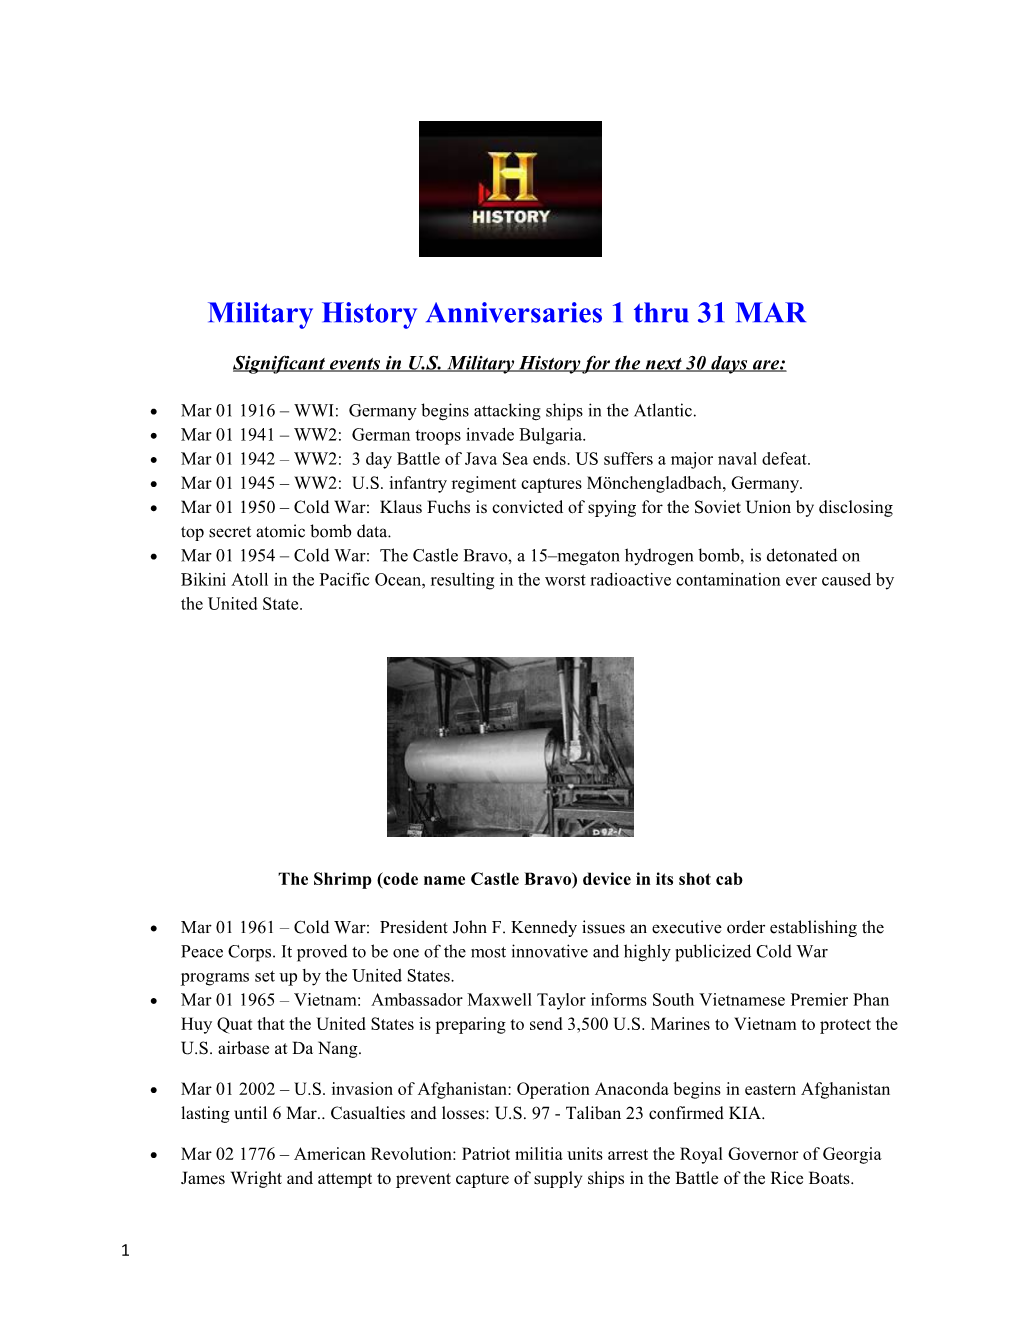 Significant Events in U.S. Military History for the Next 30 Days Are s1